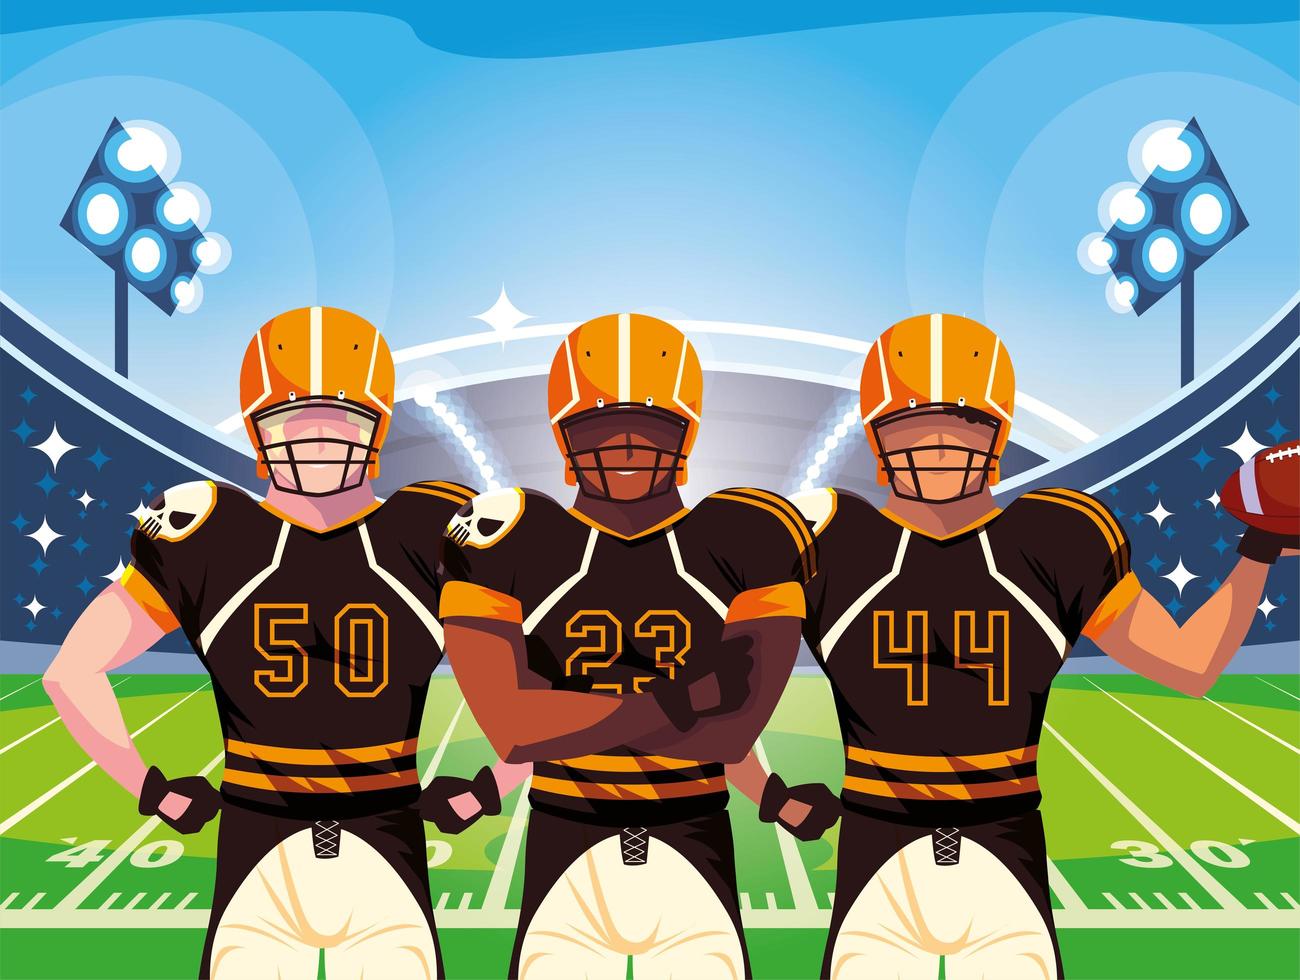 team of american football players, sportsmen with uniforms vector